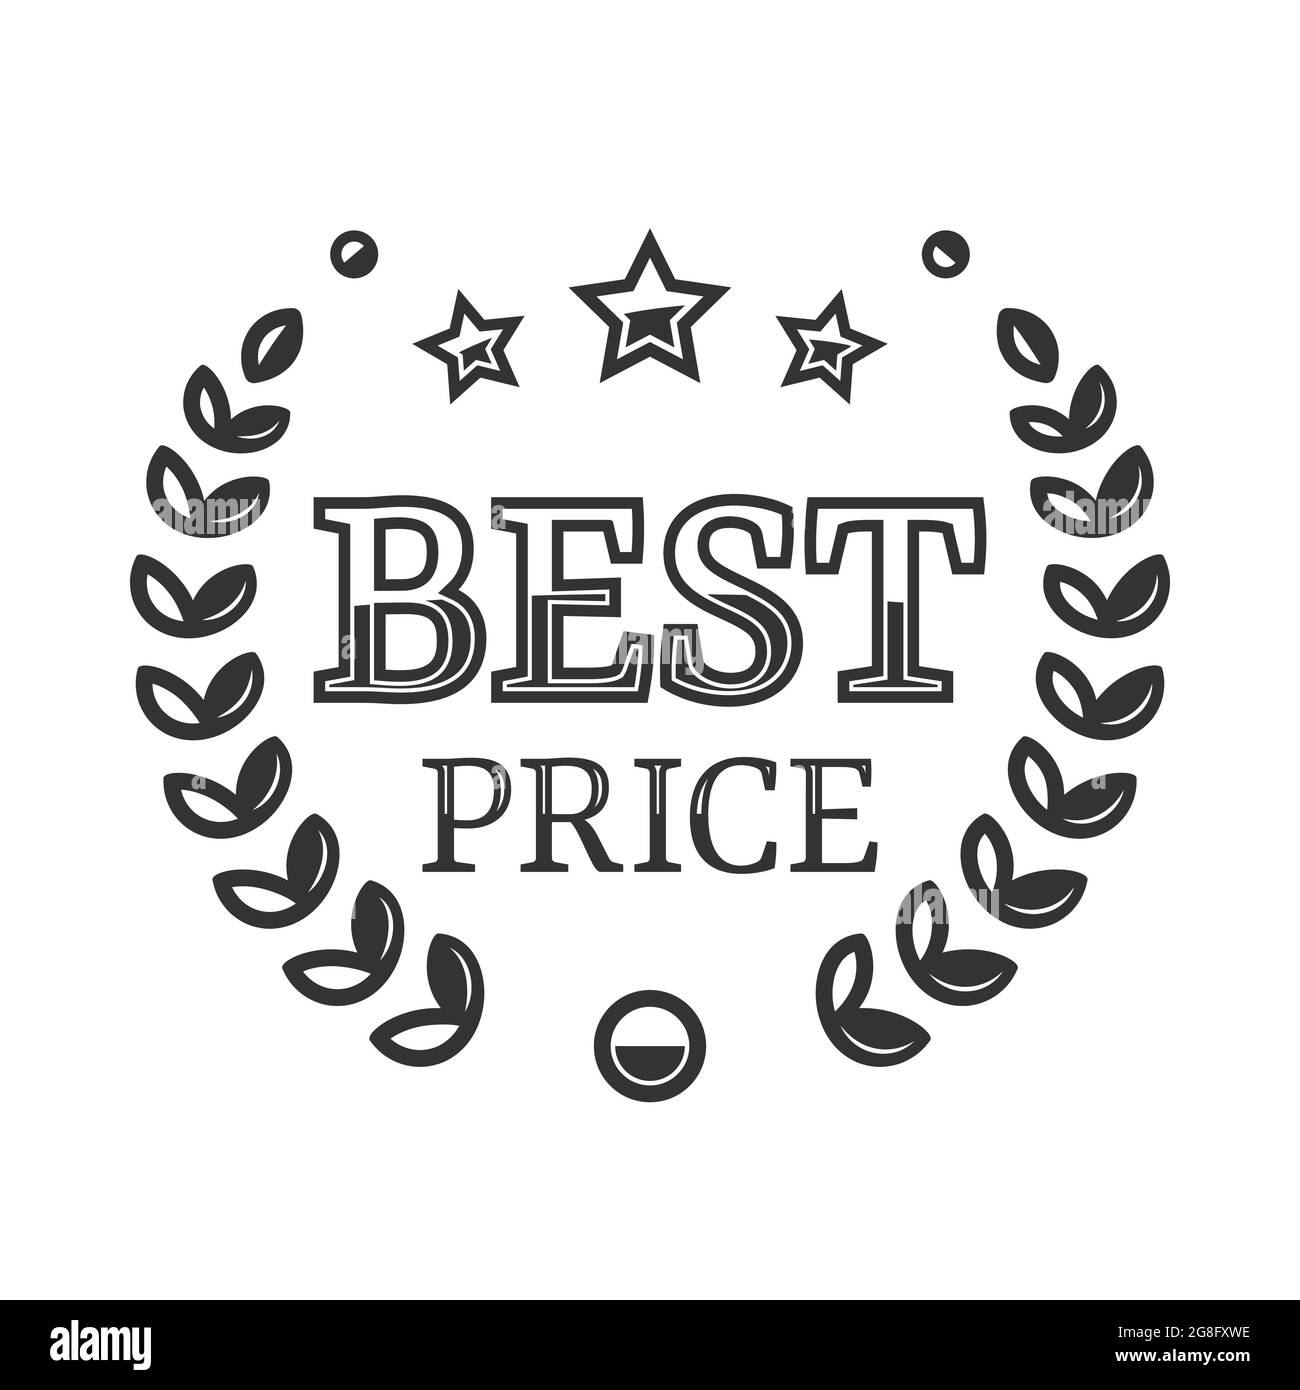 Best price, vector badge with a laurel wreath. Best price label isolated on a white background Stock Vector